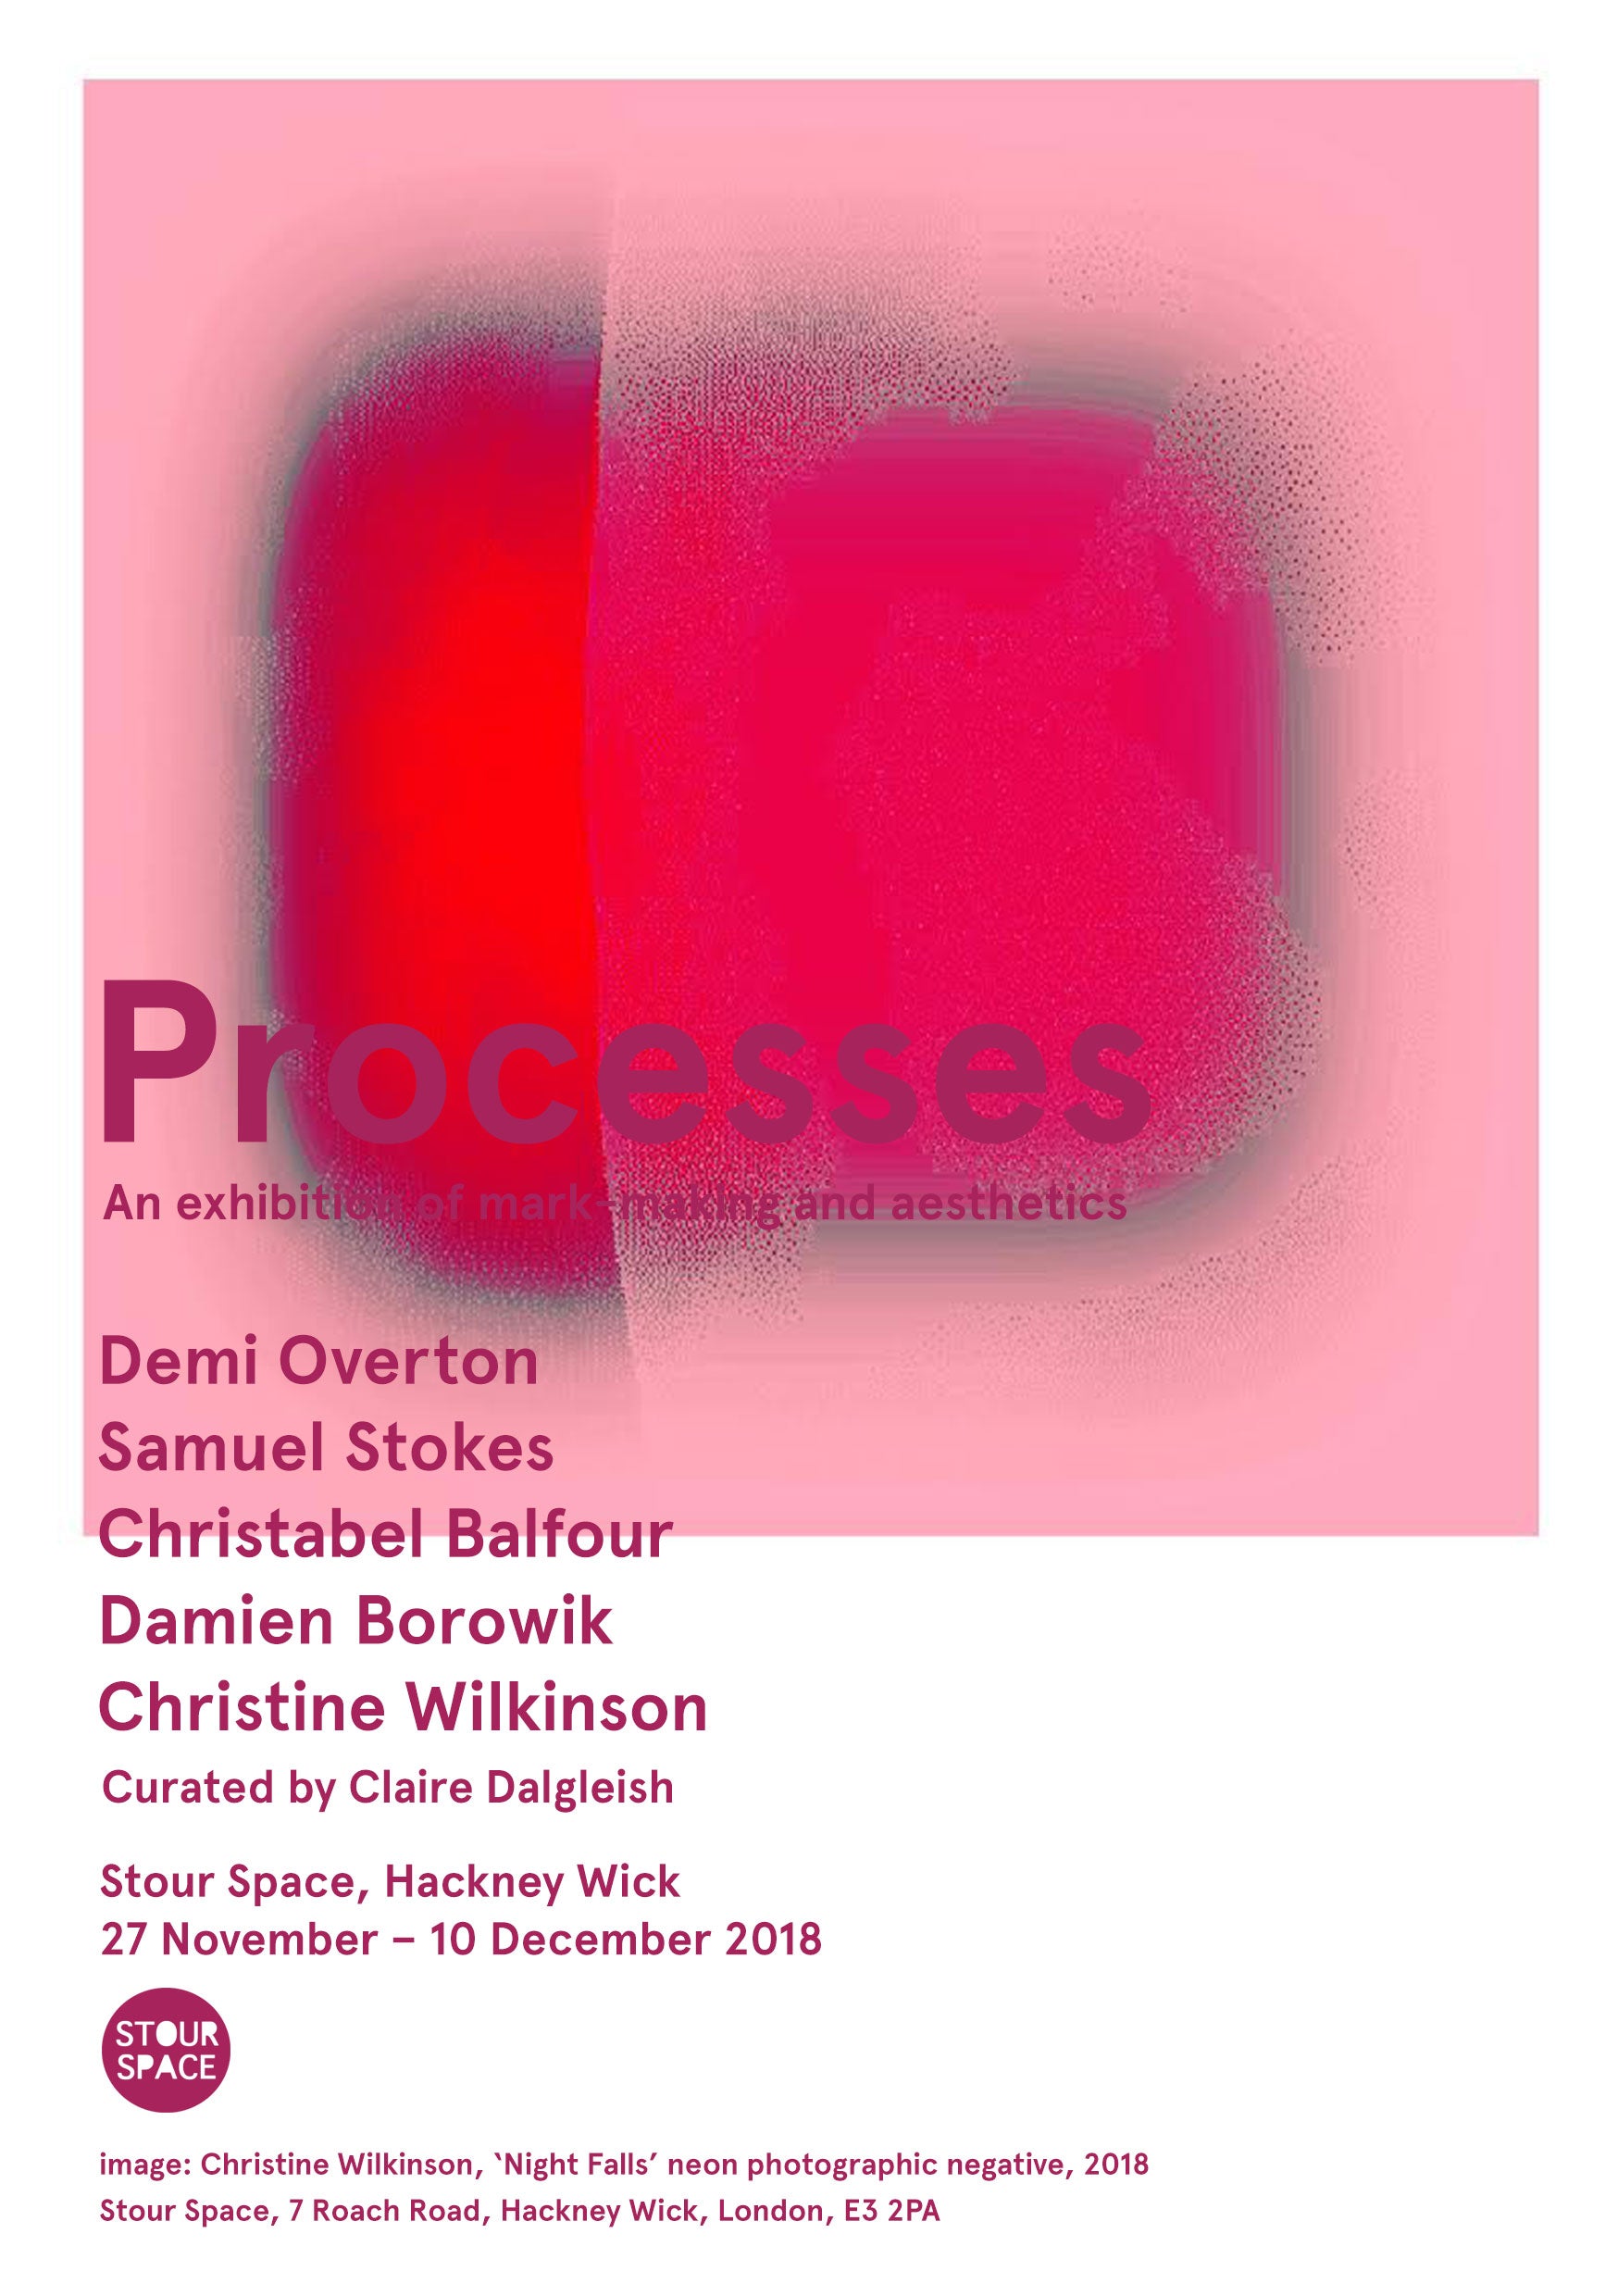 Partner Artist Christine Wilkinson exhibiting at Stour Space show "Processes"